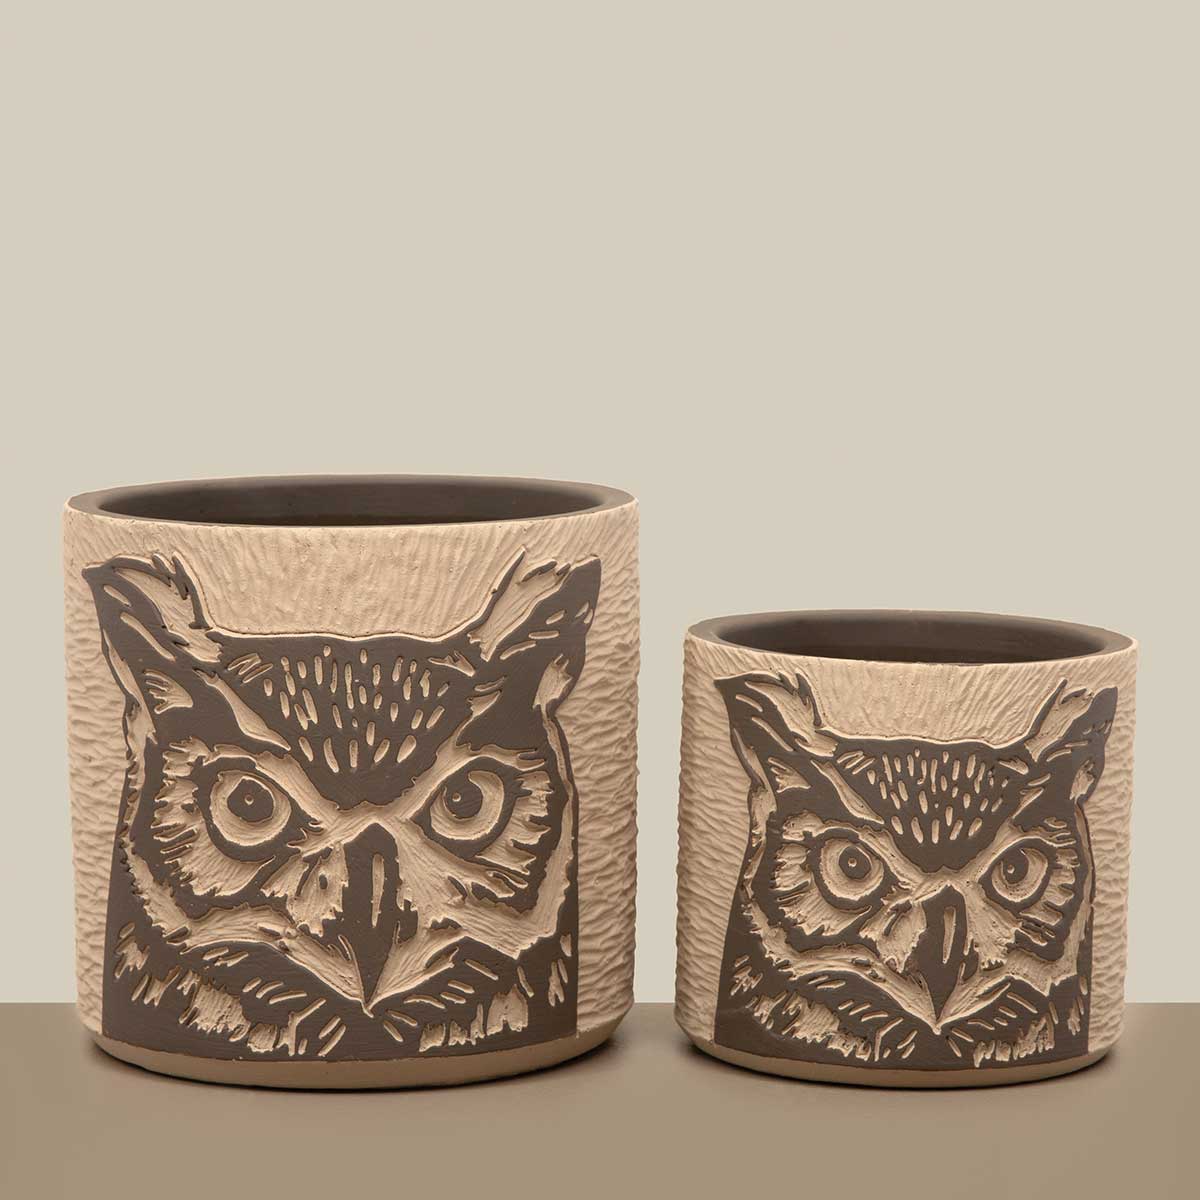 POT BARNYARD OWL SMALL 4.5IN X 4IN BROWN/BEIGE CONCRETE - Click Image to Close